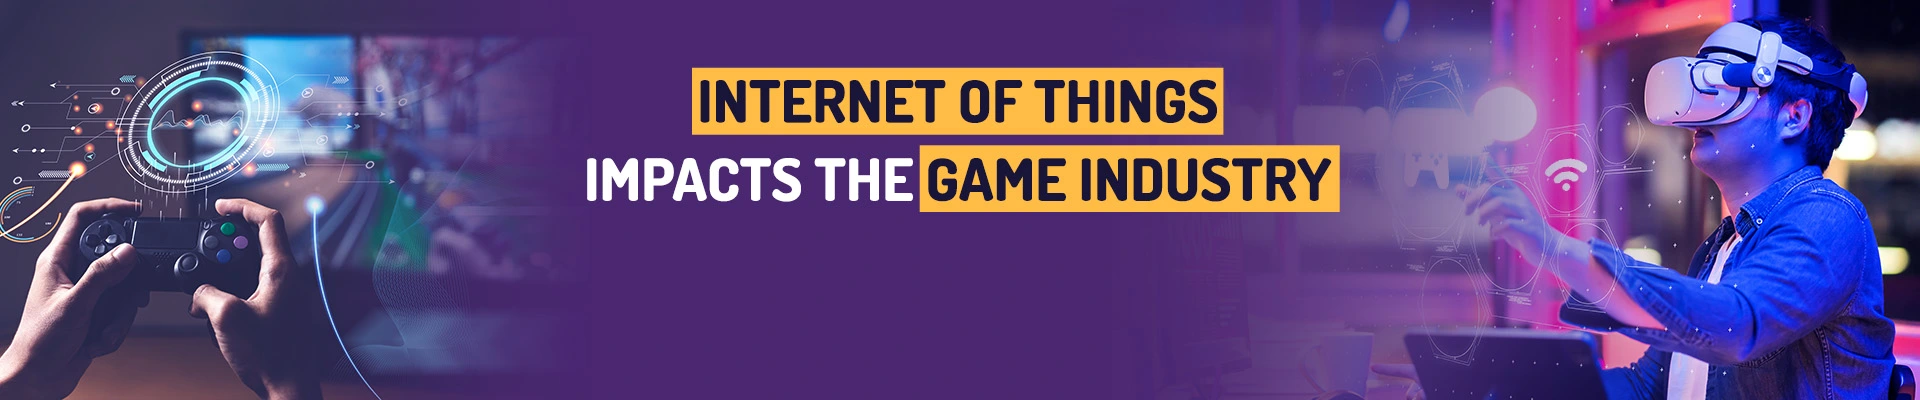 How iOT Impacts the Game Industry